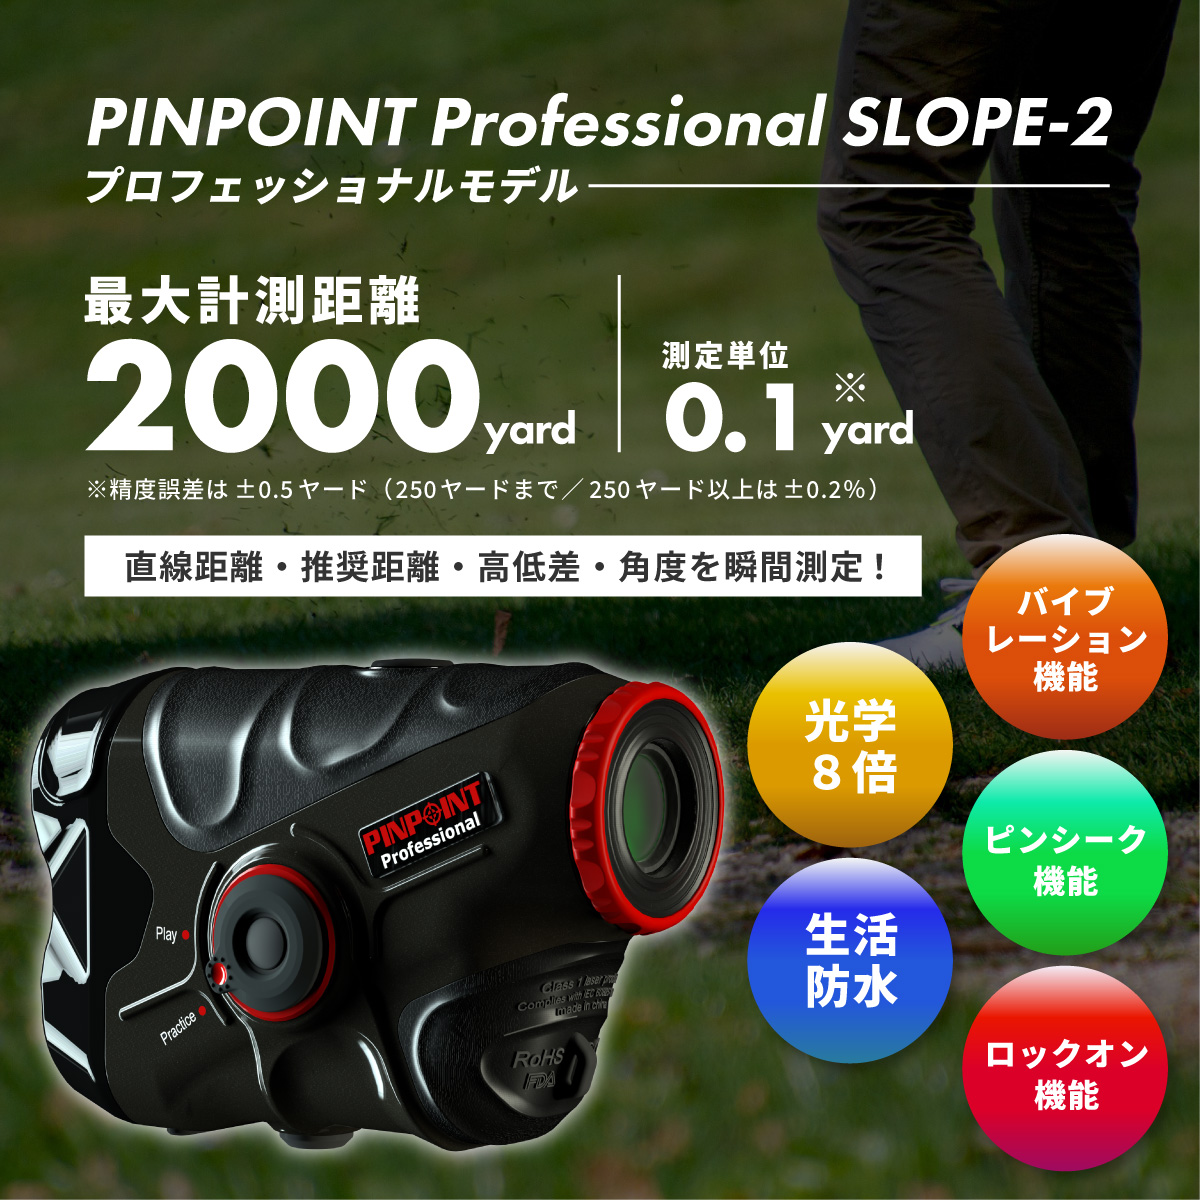 IK新品PINPOINT Professional LINEAR－１